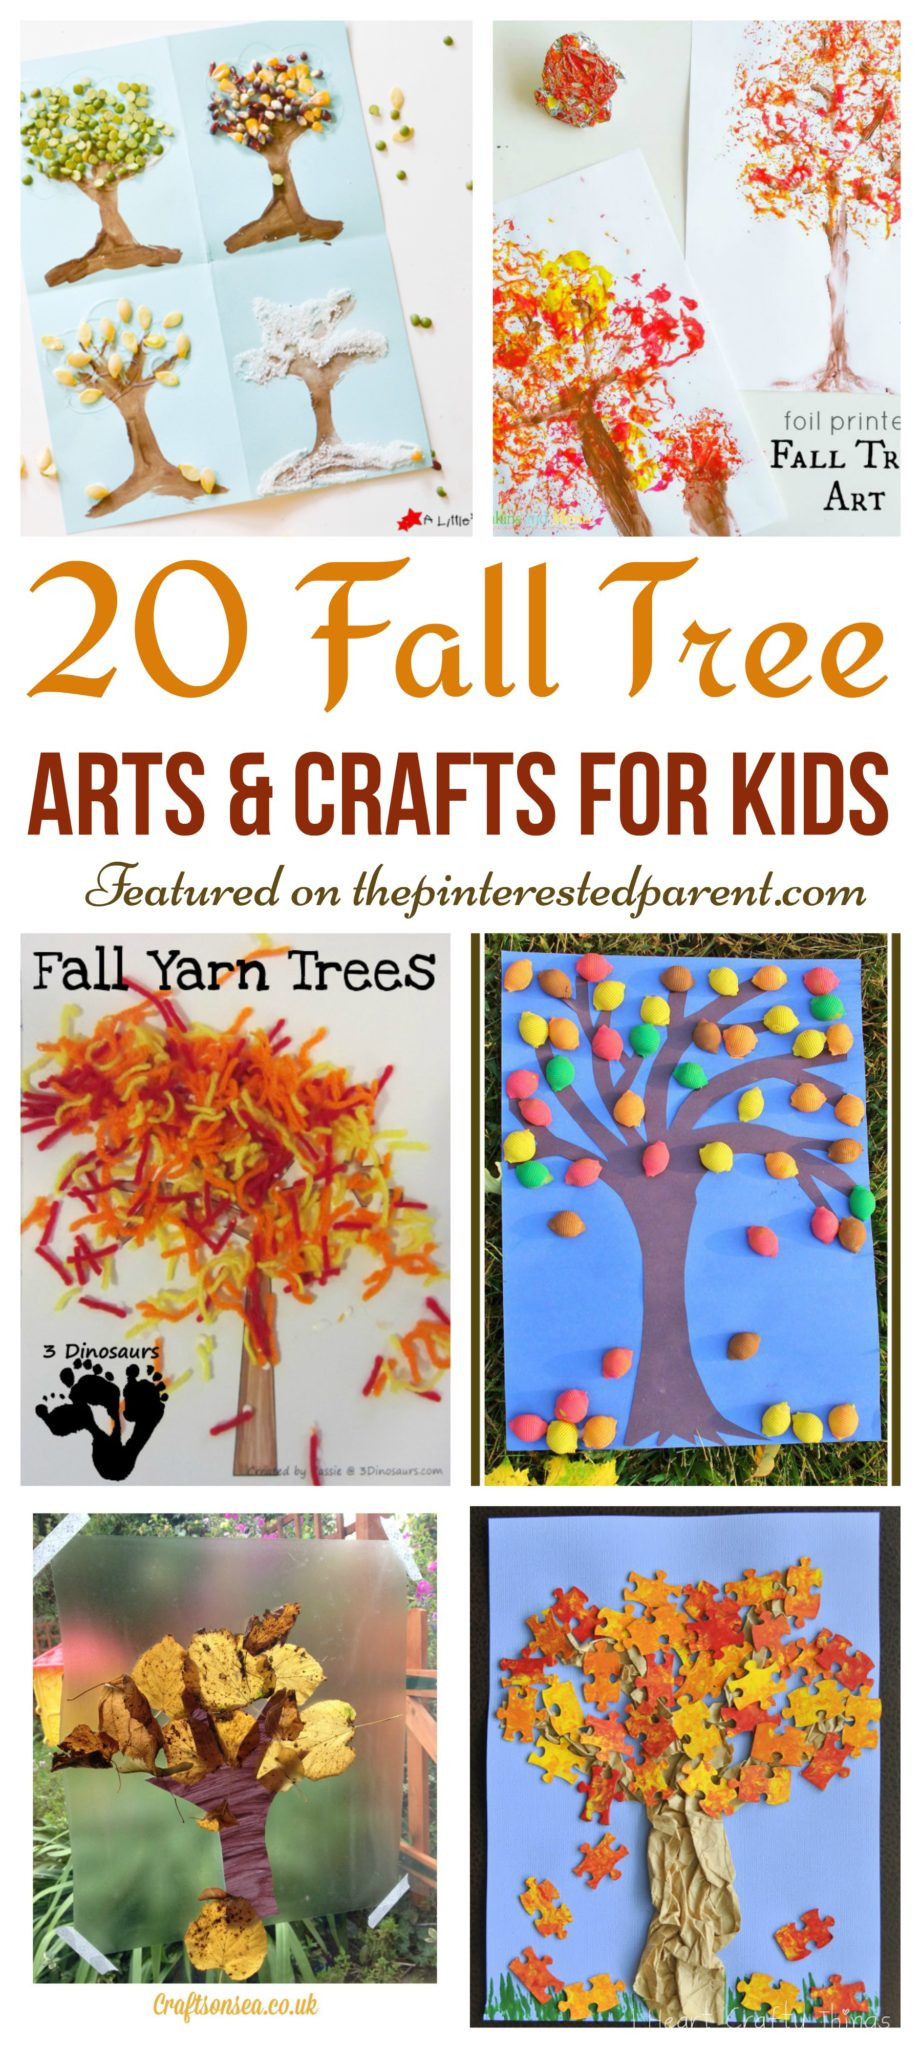 Fall Toddler Craft Ideas
 20 Fall Tree Arts & Crafts Ideas For Kids – The